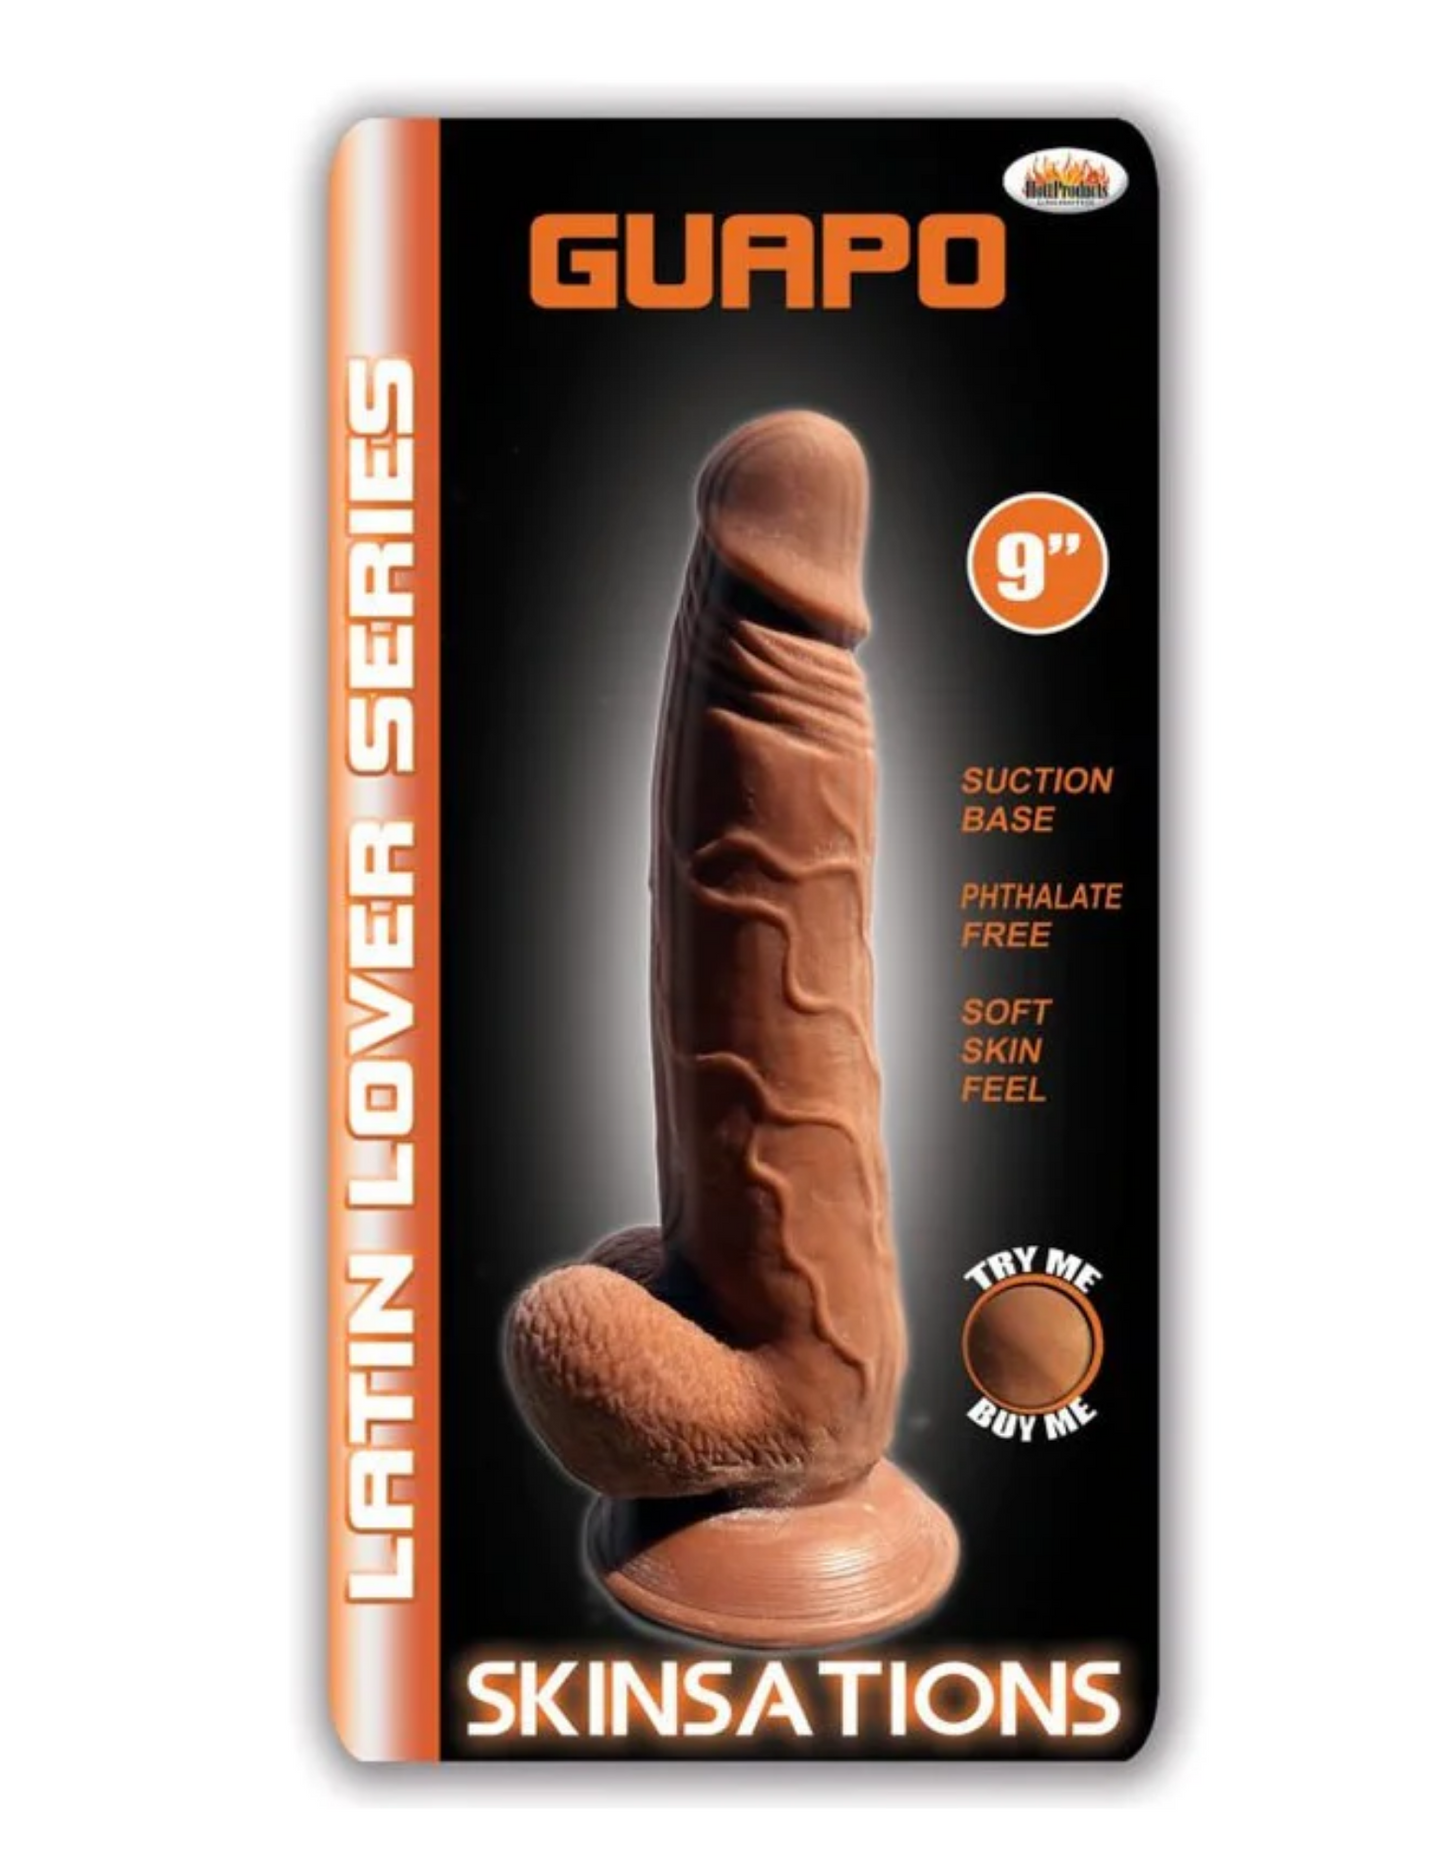 Photo of the product and package for the Skinsations Guapo Dildo from Hott Products..